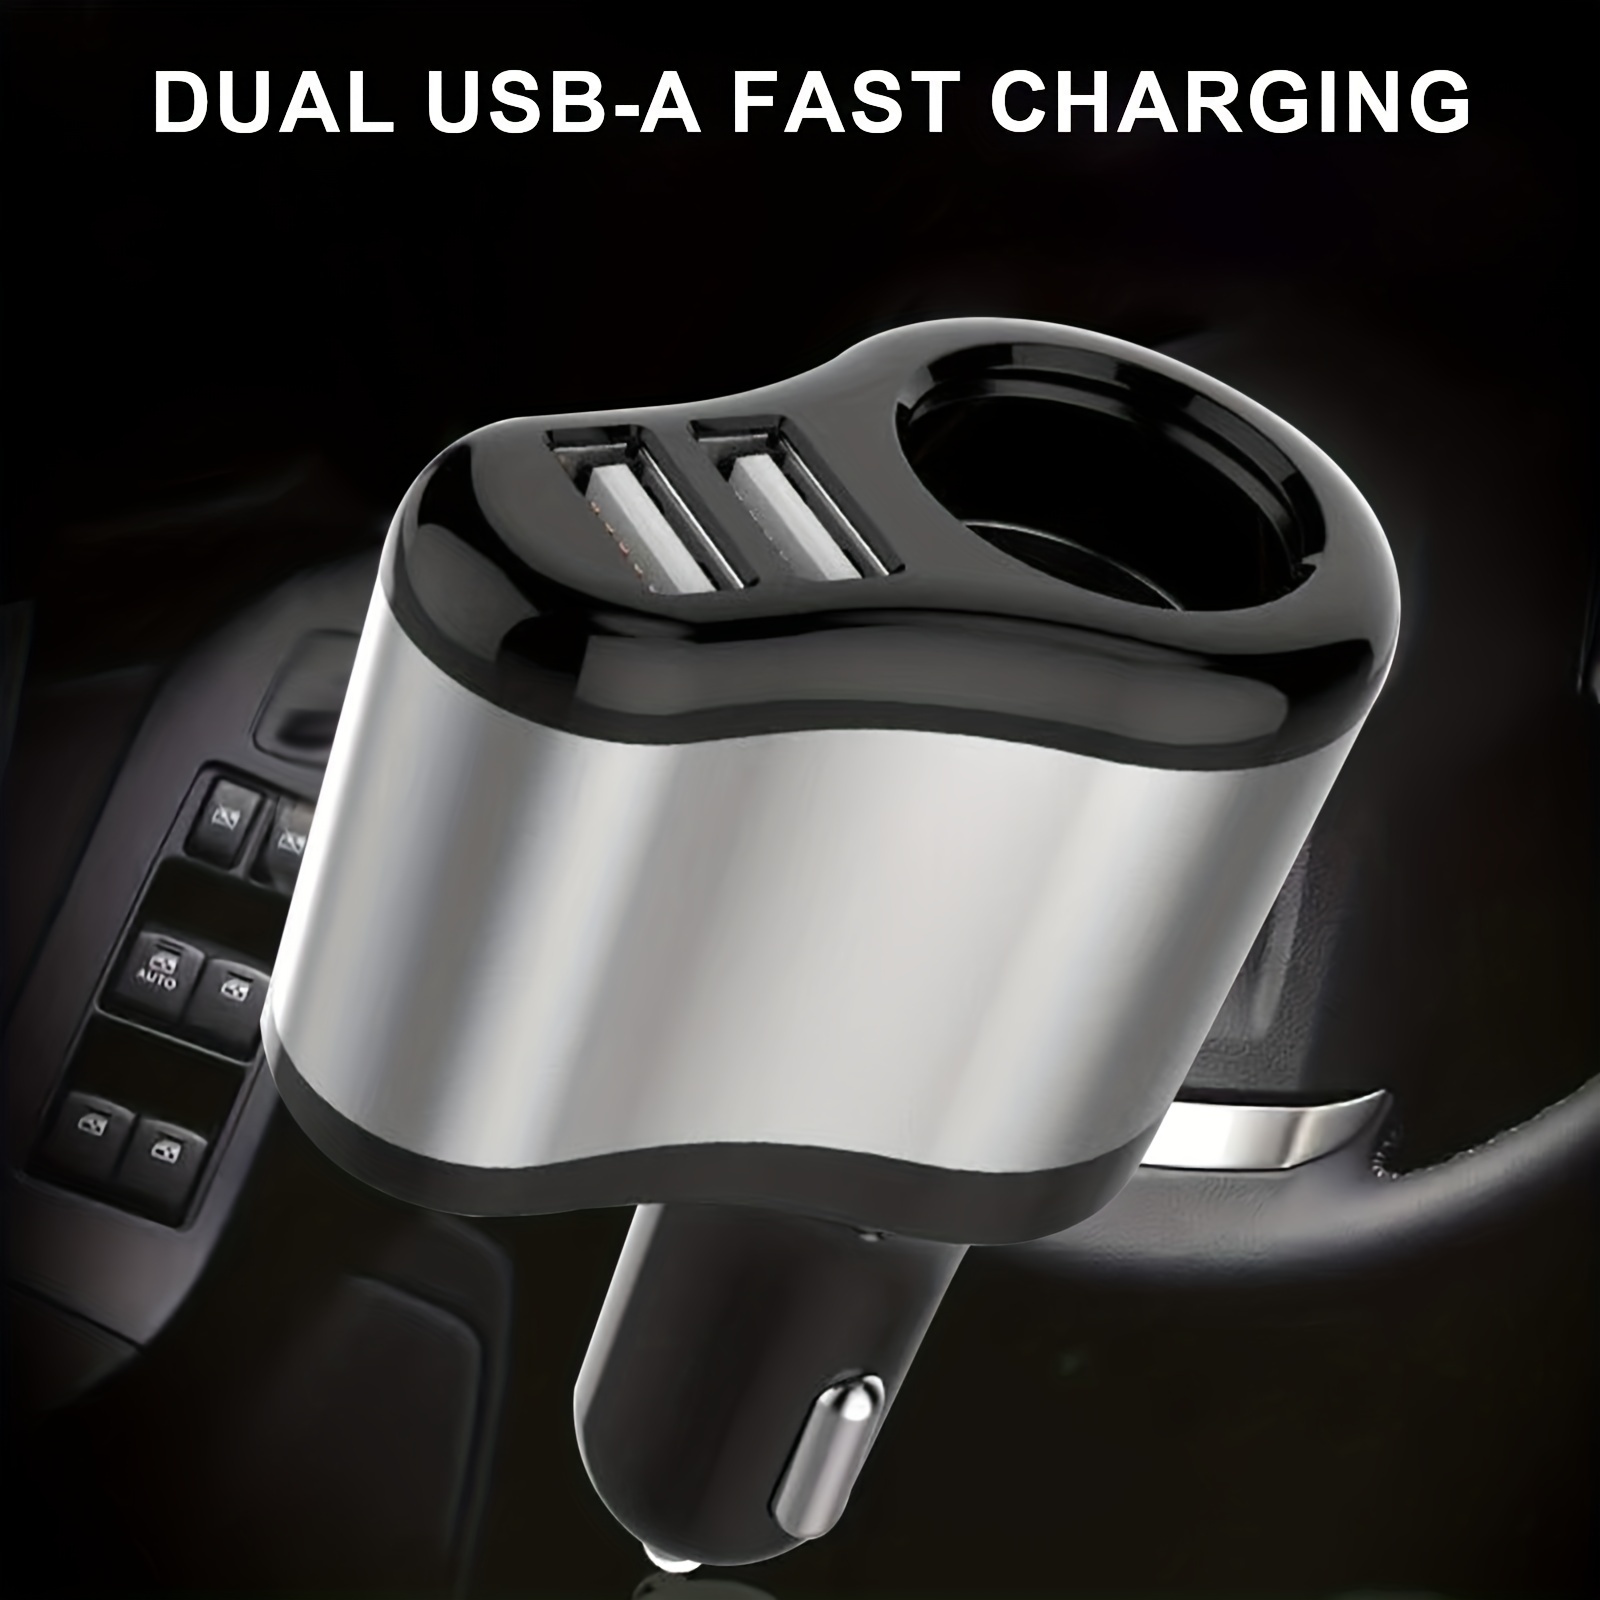 Chargeur voiture double USB iPhone, iPad, iPod